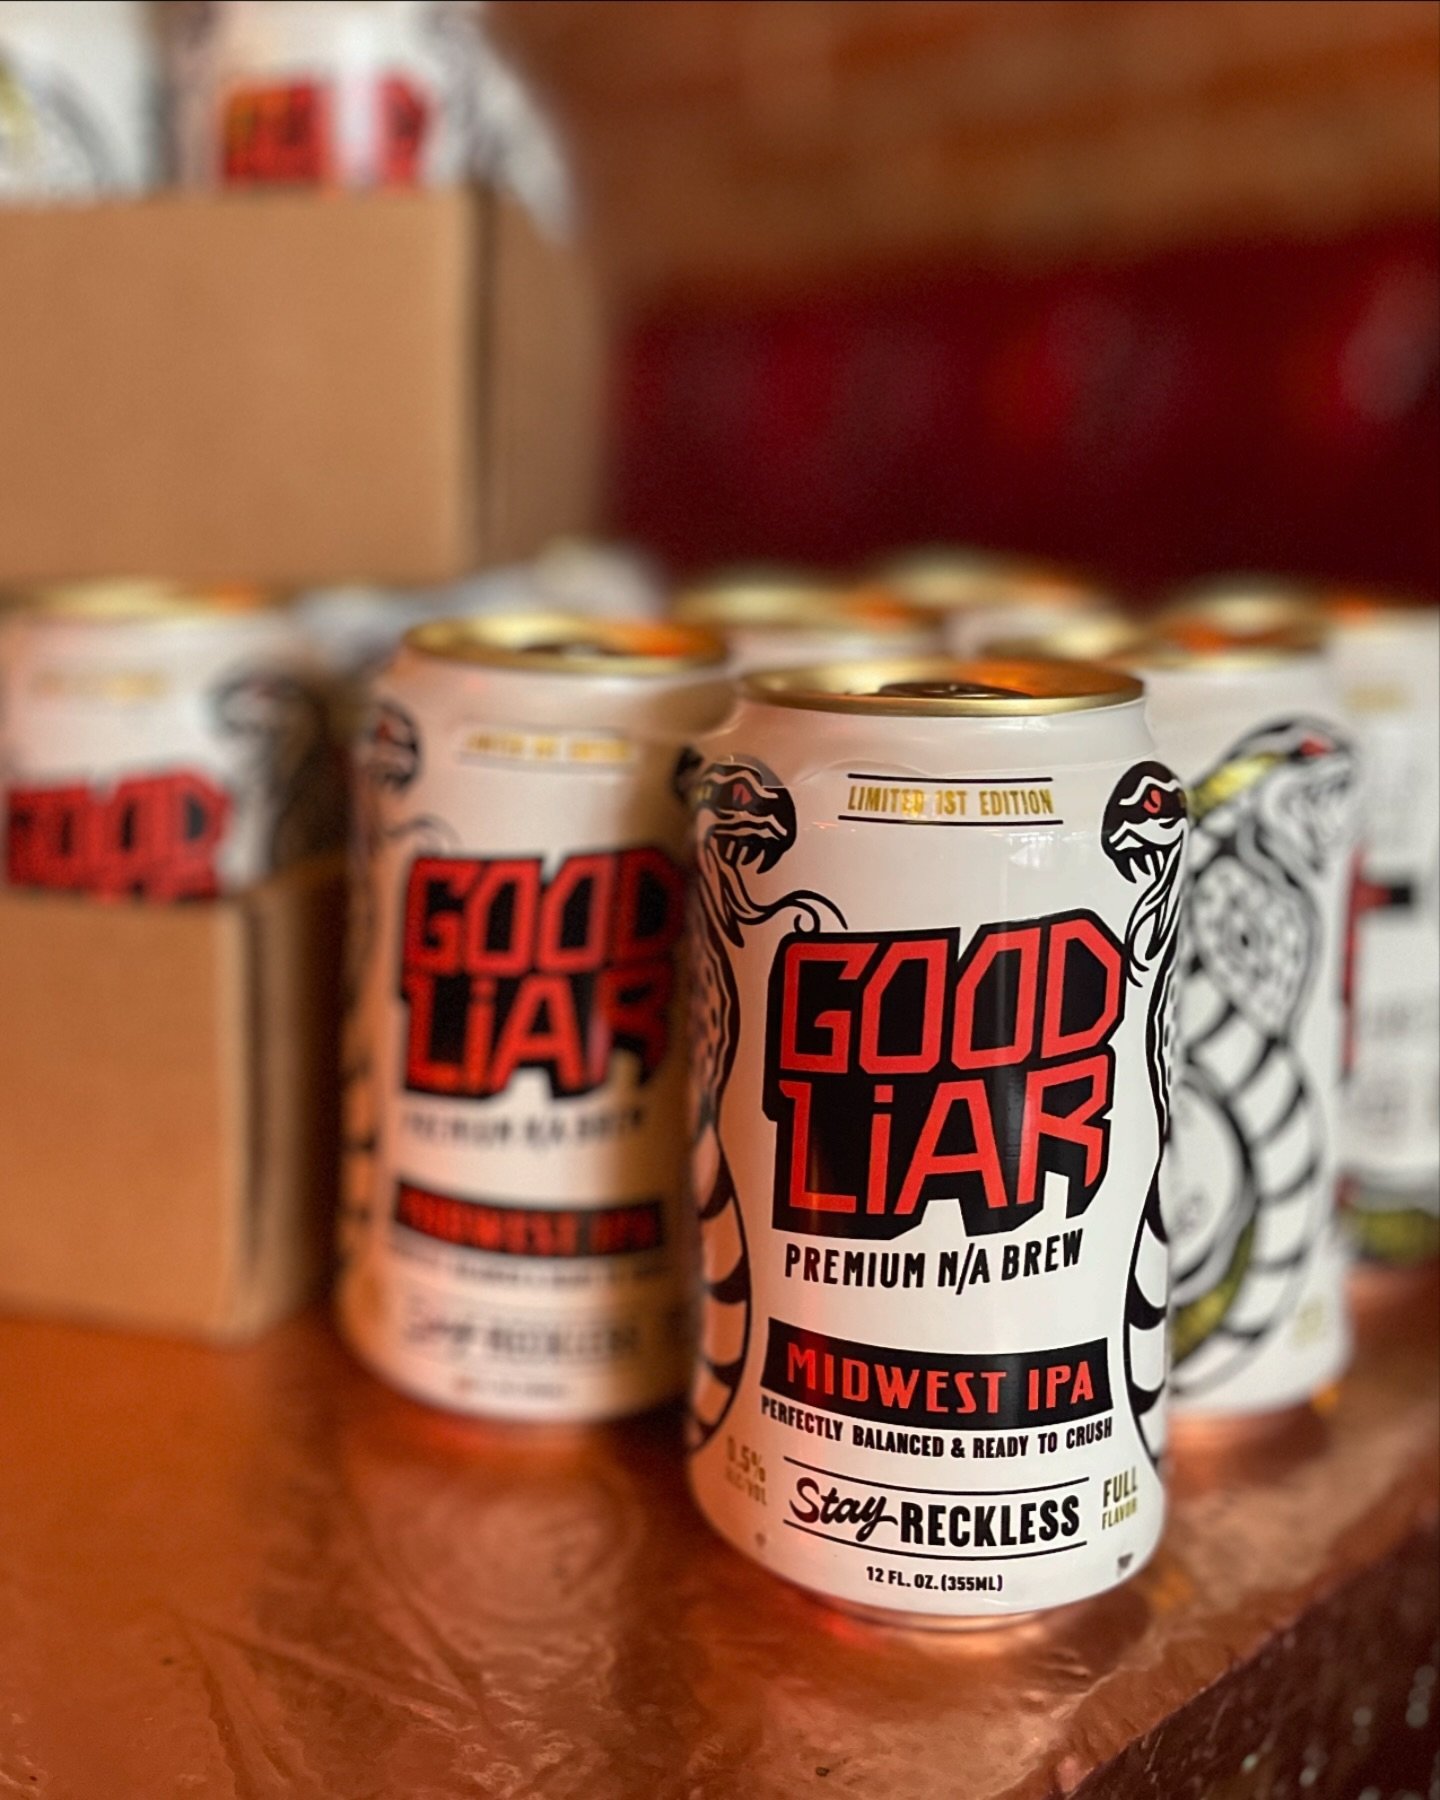 You don&rsquo;t need the booze to have a drink. 

Now serving @drinkgoodliar NA IPA.